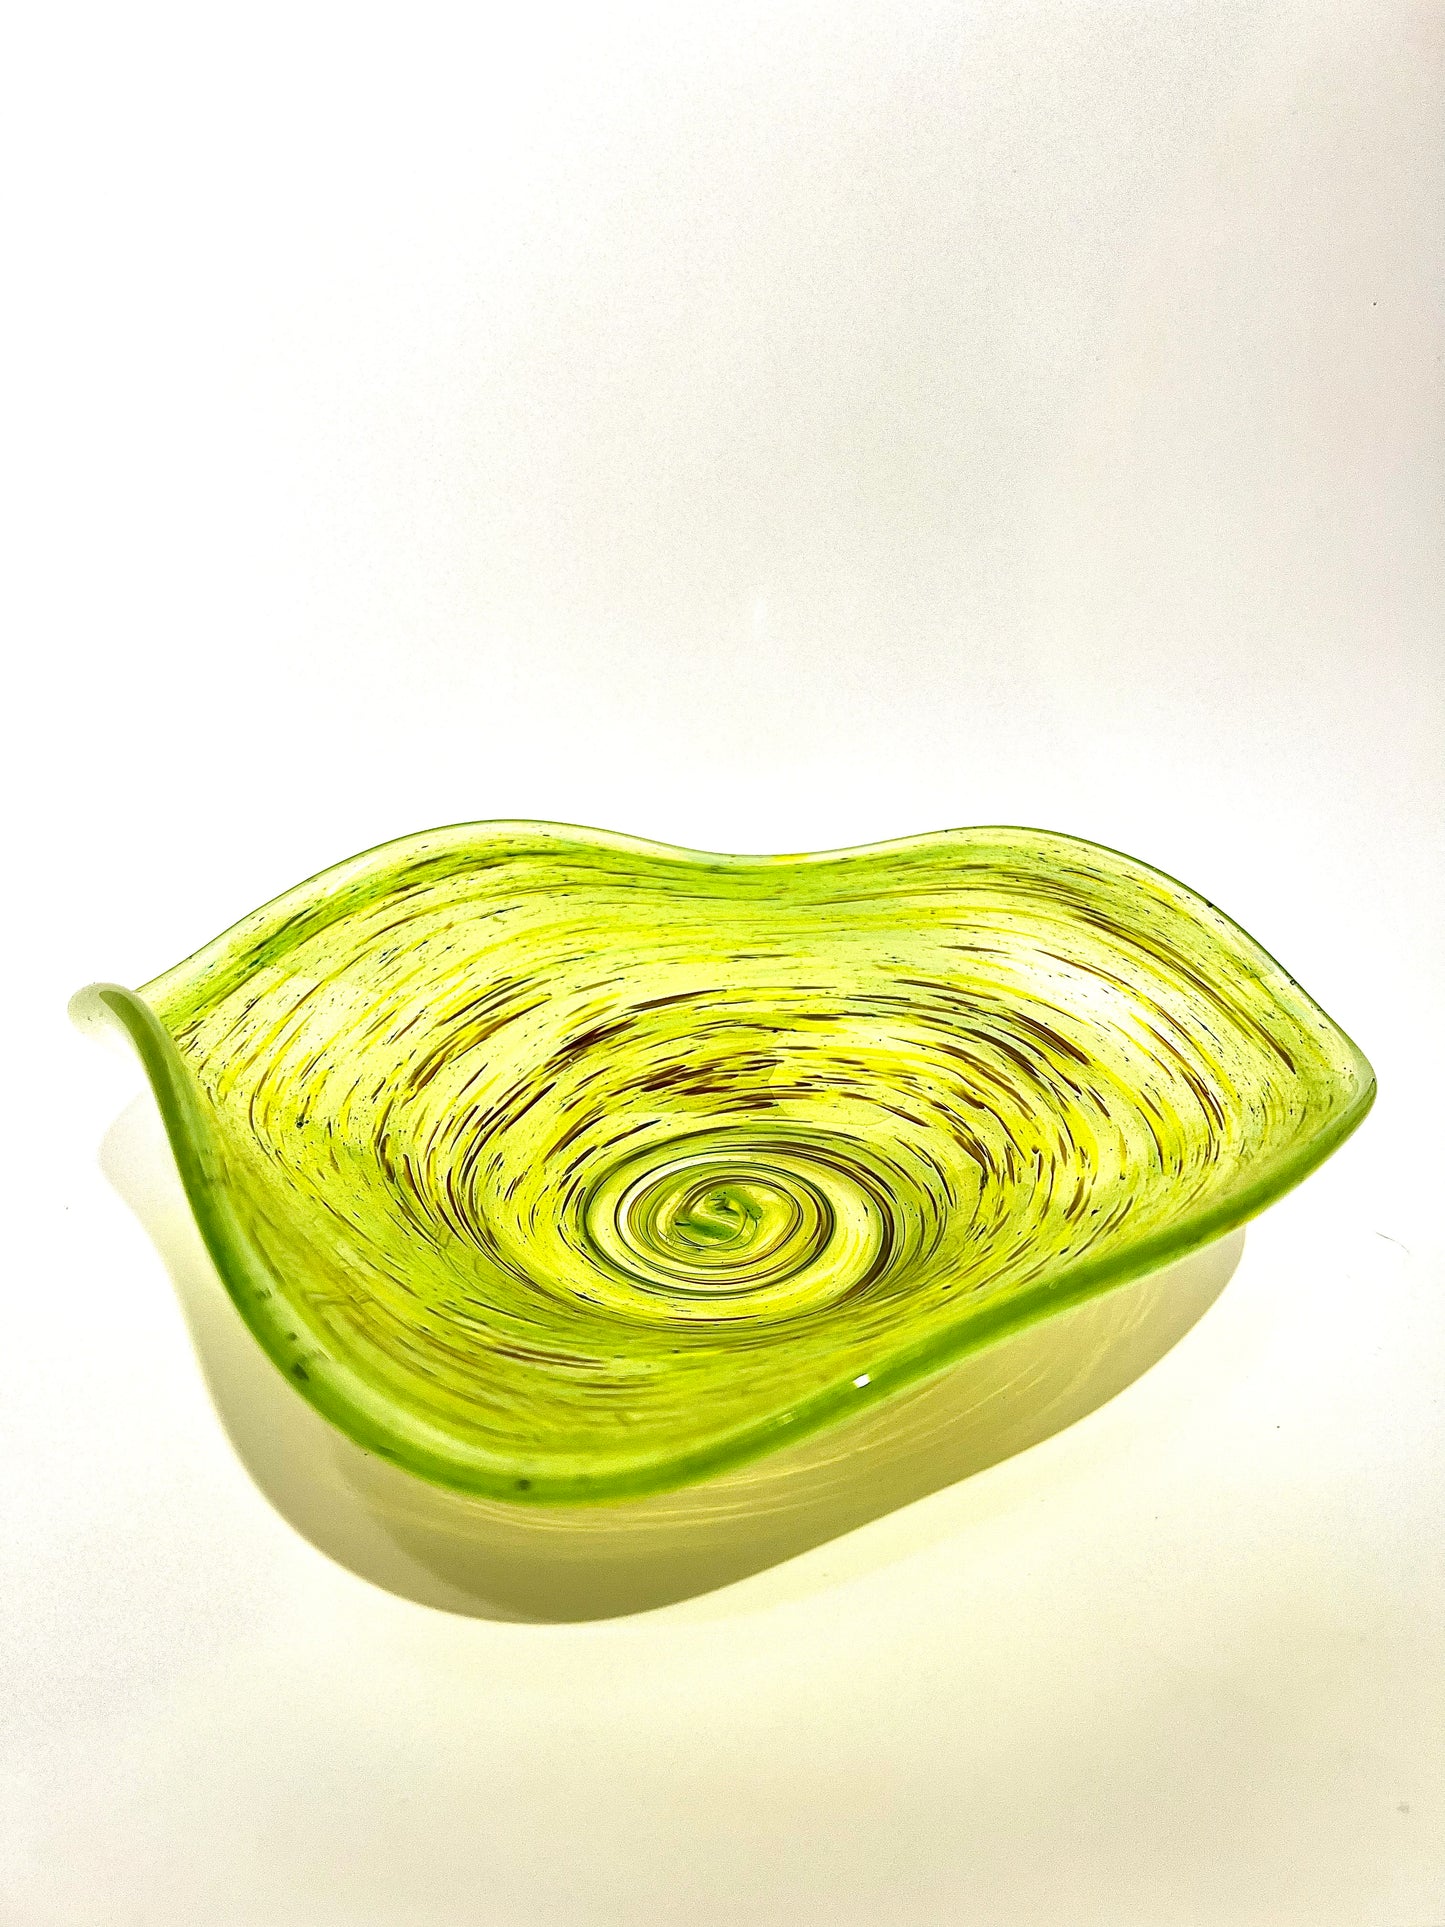 Lime Green and Yellow Wavy bowl